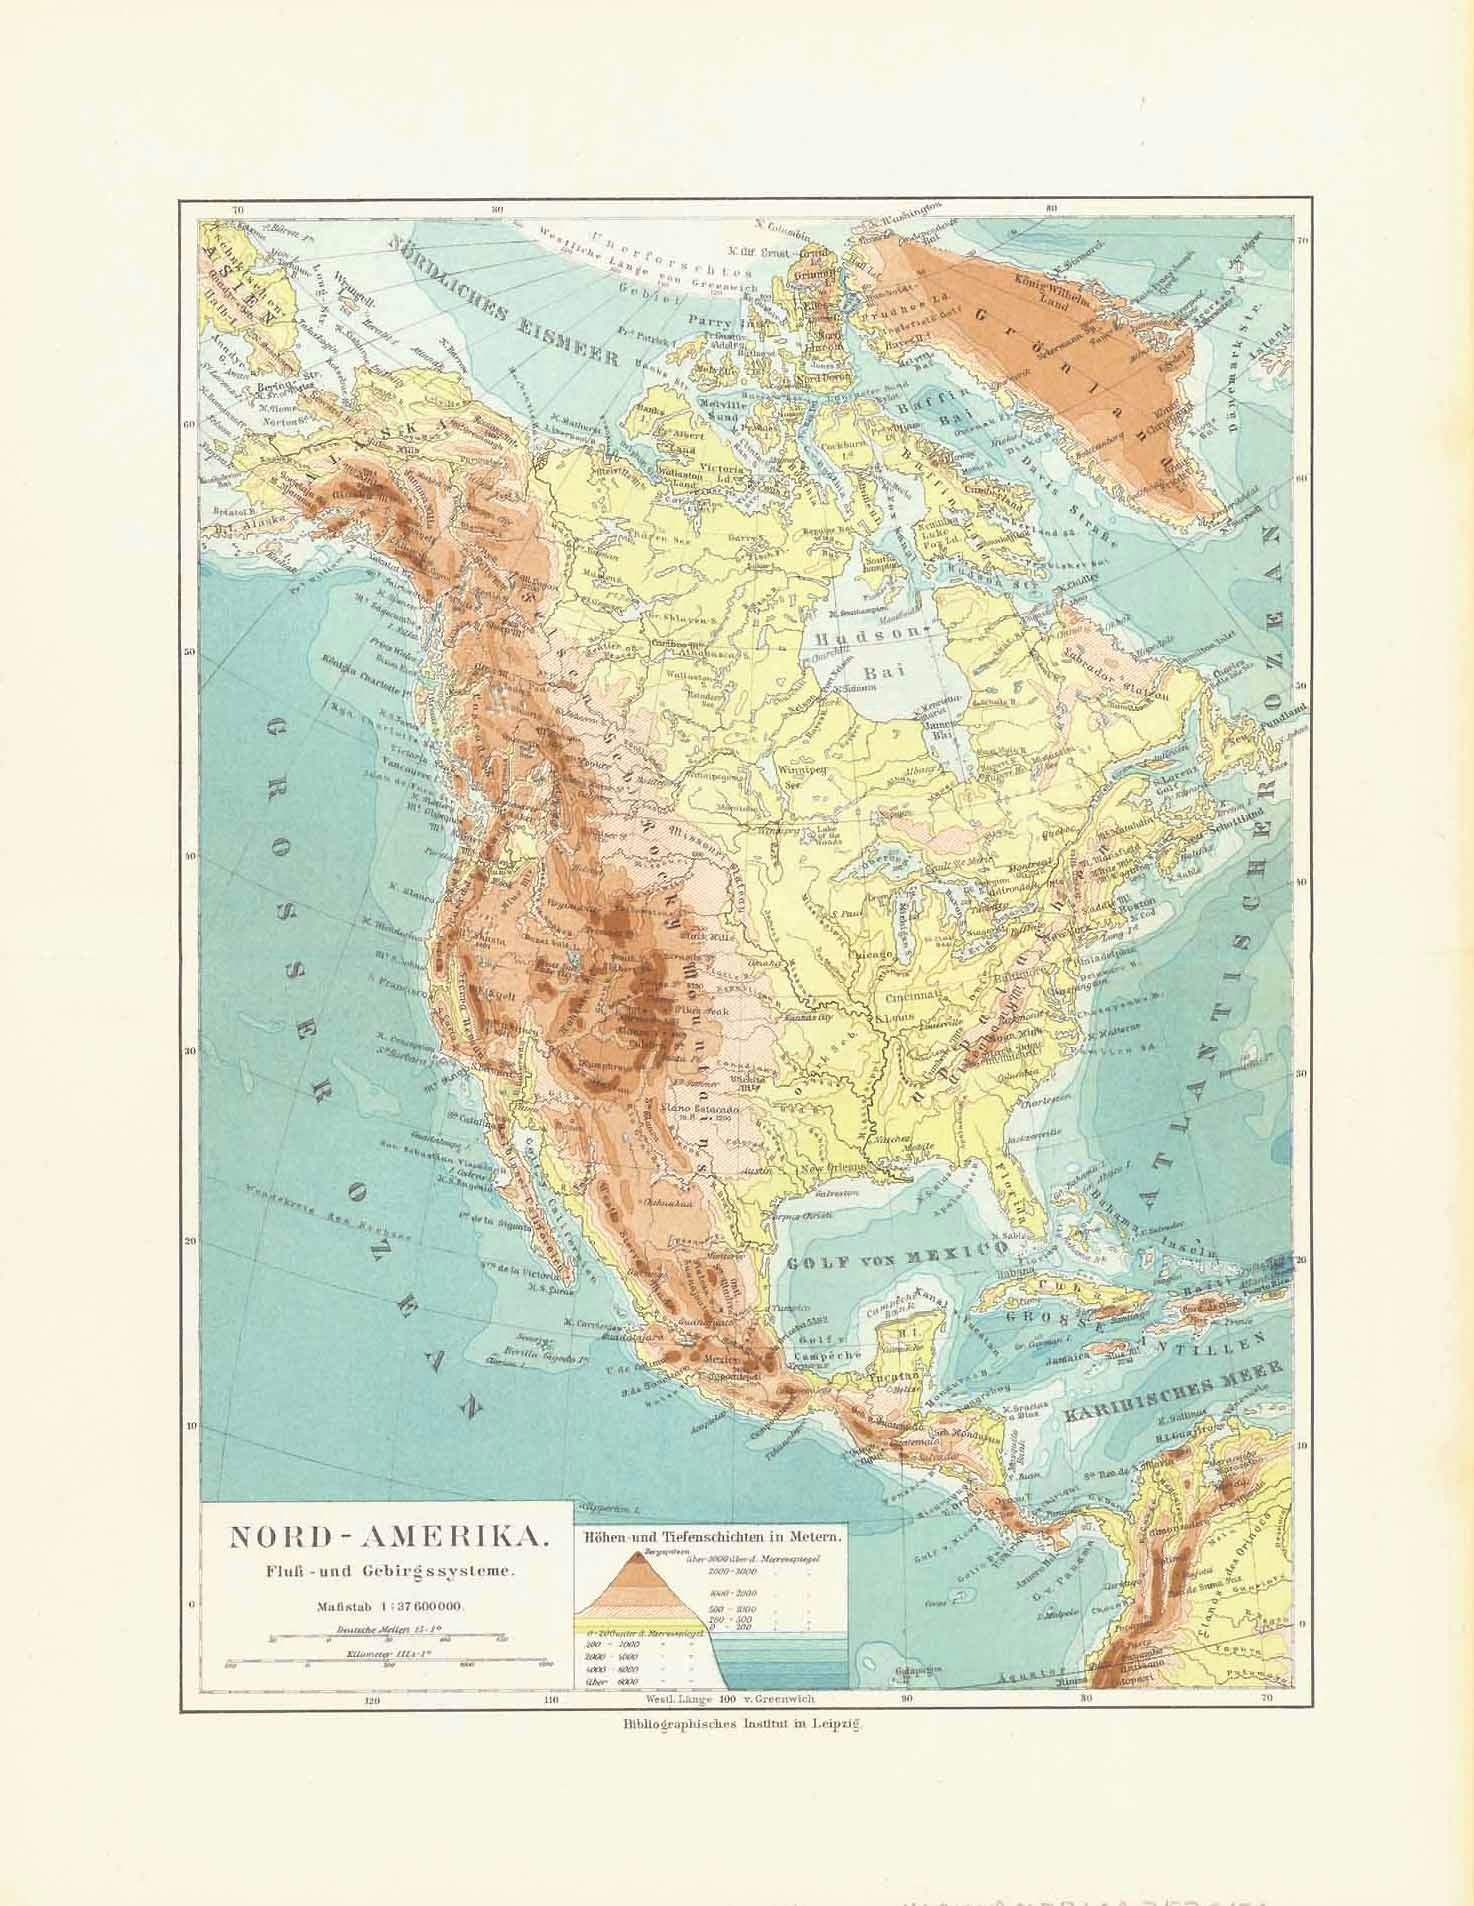 "Nord - Amerika Fluss und Gerbirgssysteme"  Chromolithograph published 1904.  Map shows the rivers and mountain ranges of North America.  Original antique print , interior design, wall decoration, ideas, idea, gift ideas, present, vintage, charming, special, decoration, home interior, living room design